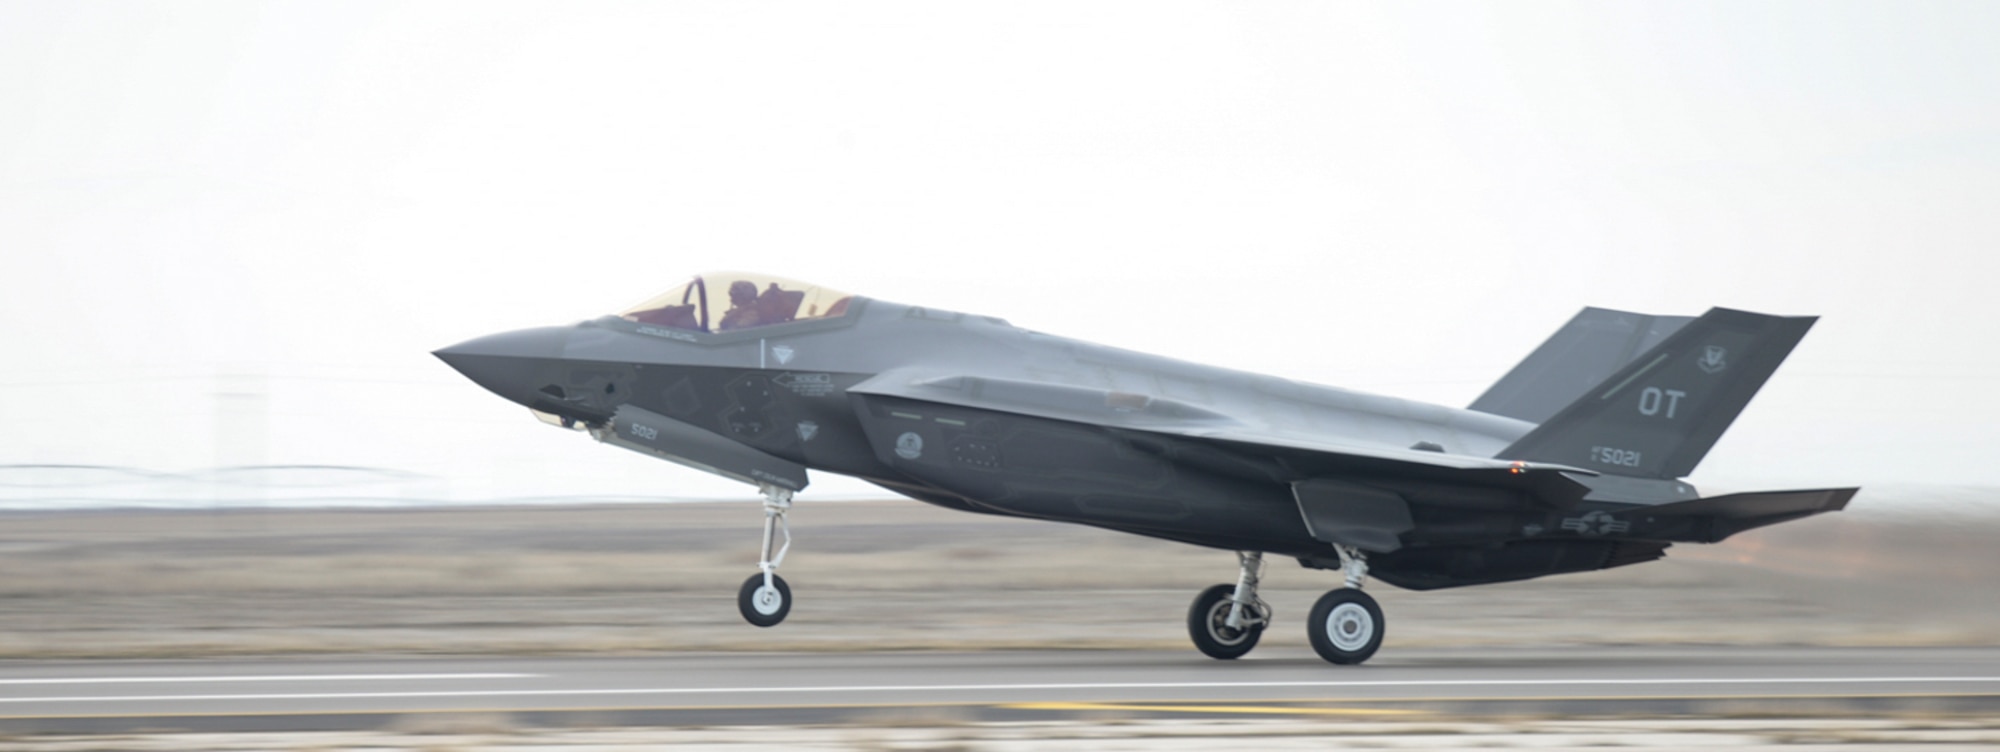 An F-35A ascends into take-off at Mountain Home Air Force Base, Idaho, Feb. 12, 2016. The aircraft is here to execute key mission capabilities as part of a deployment test. (U.S. Air Force photo by Airman 1st Class Jessica H. Evans/RELEASED)